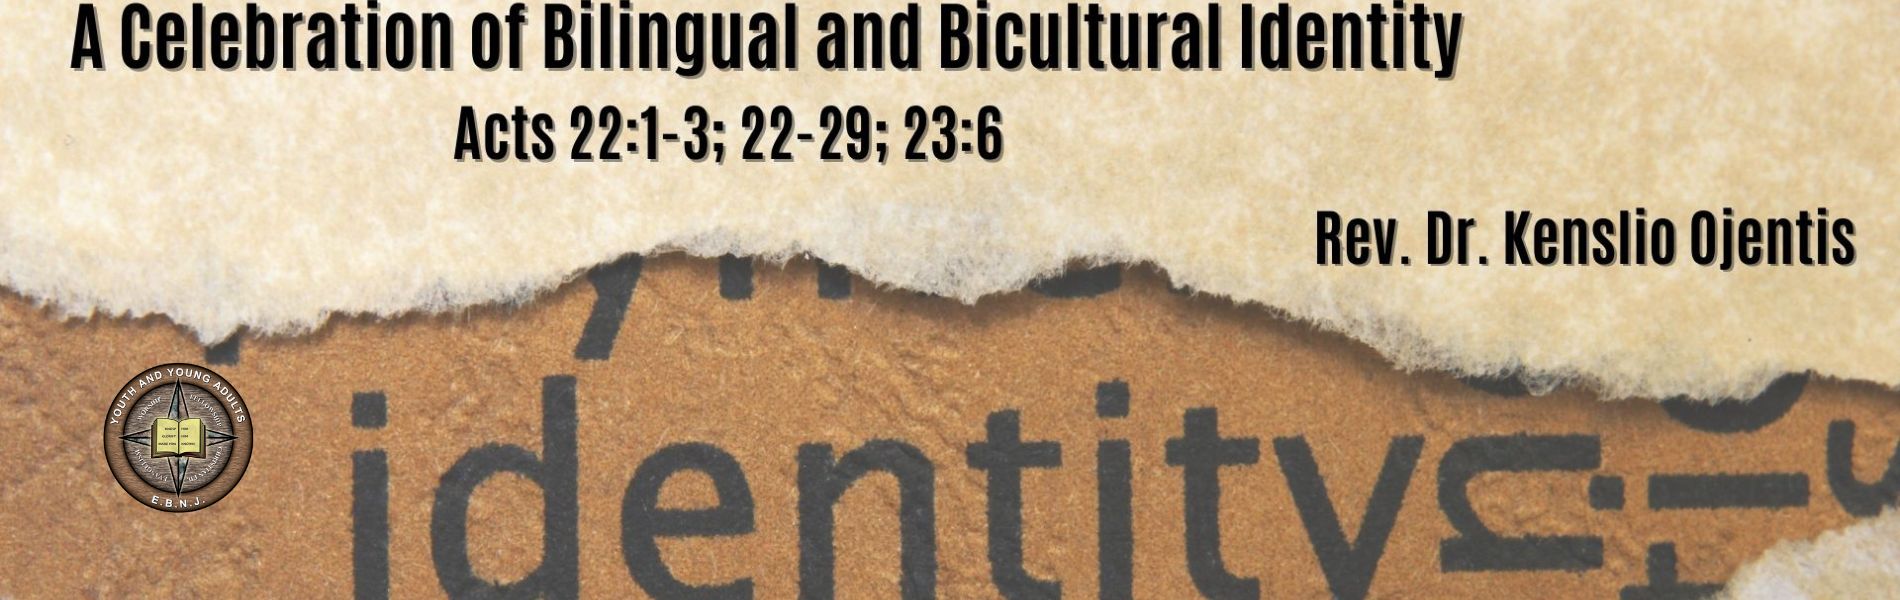 A Celebration of Bilingual and Bicultural Identity